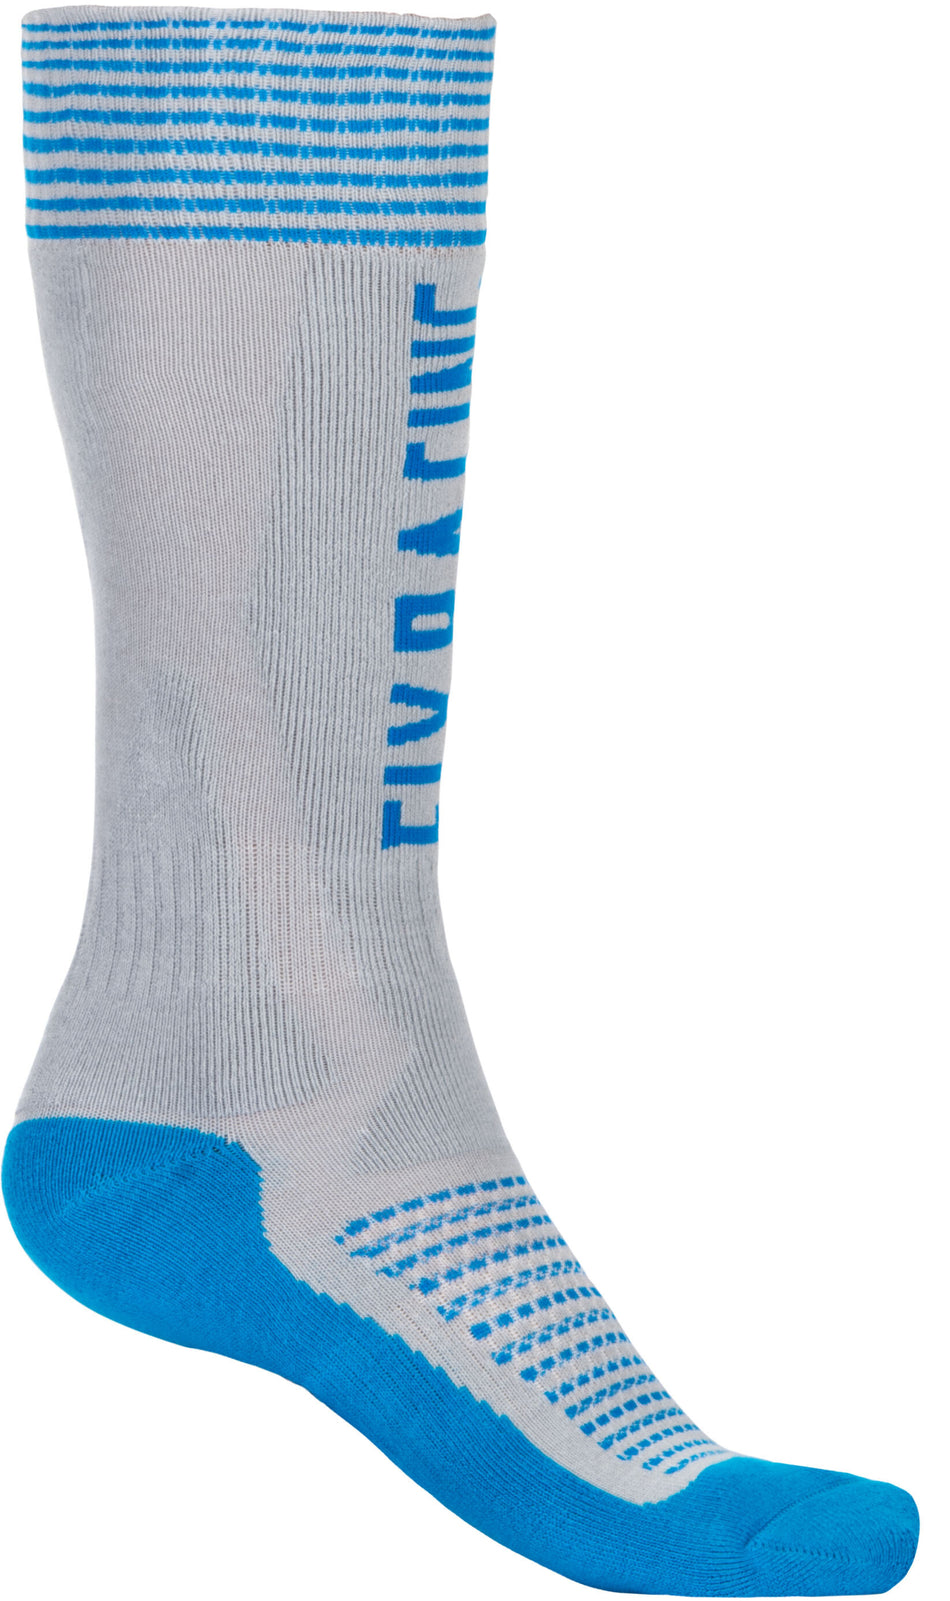 FLY RACING Mx Pro Sock Thick Grey/Blue Sm/Md 350-0521S